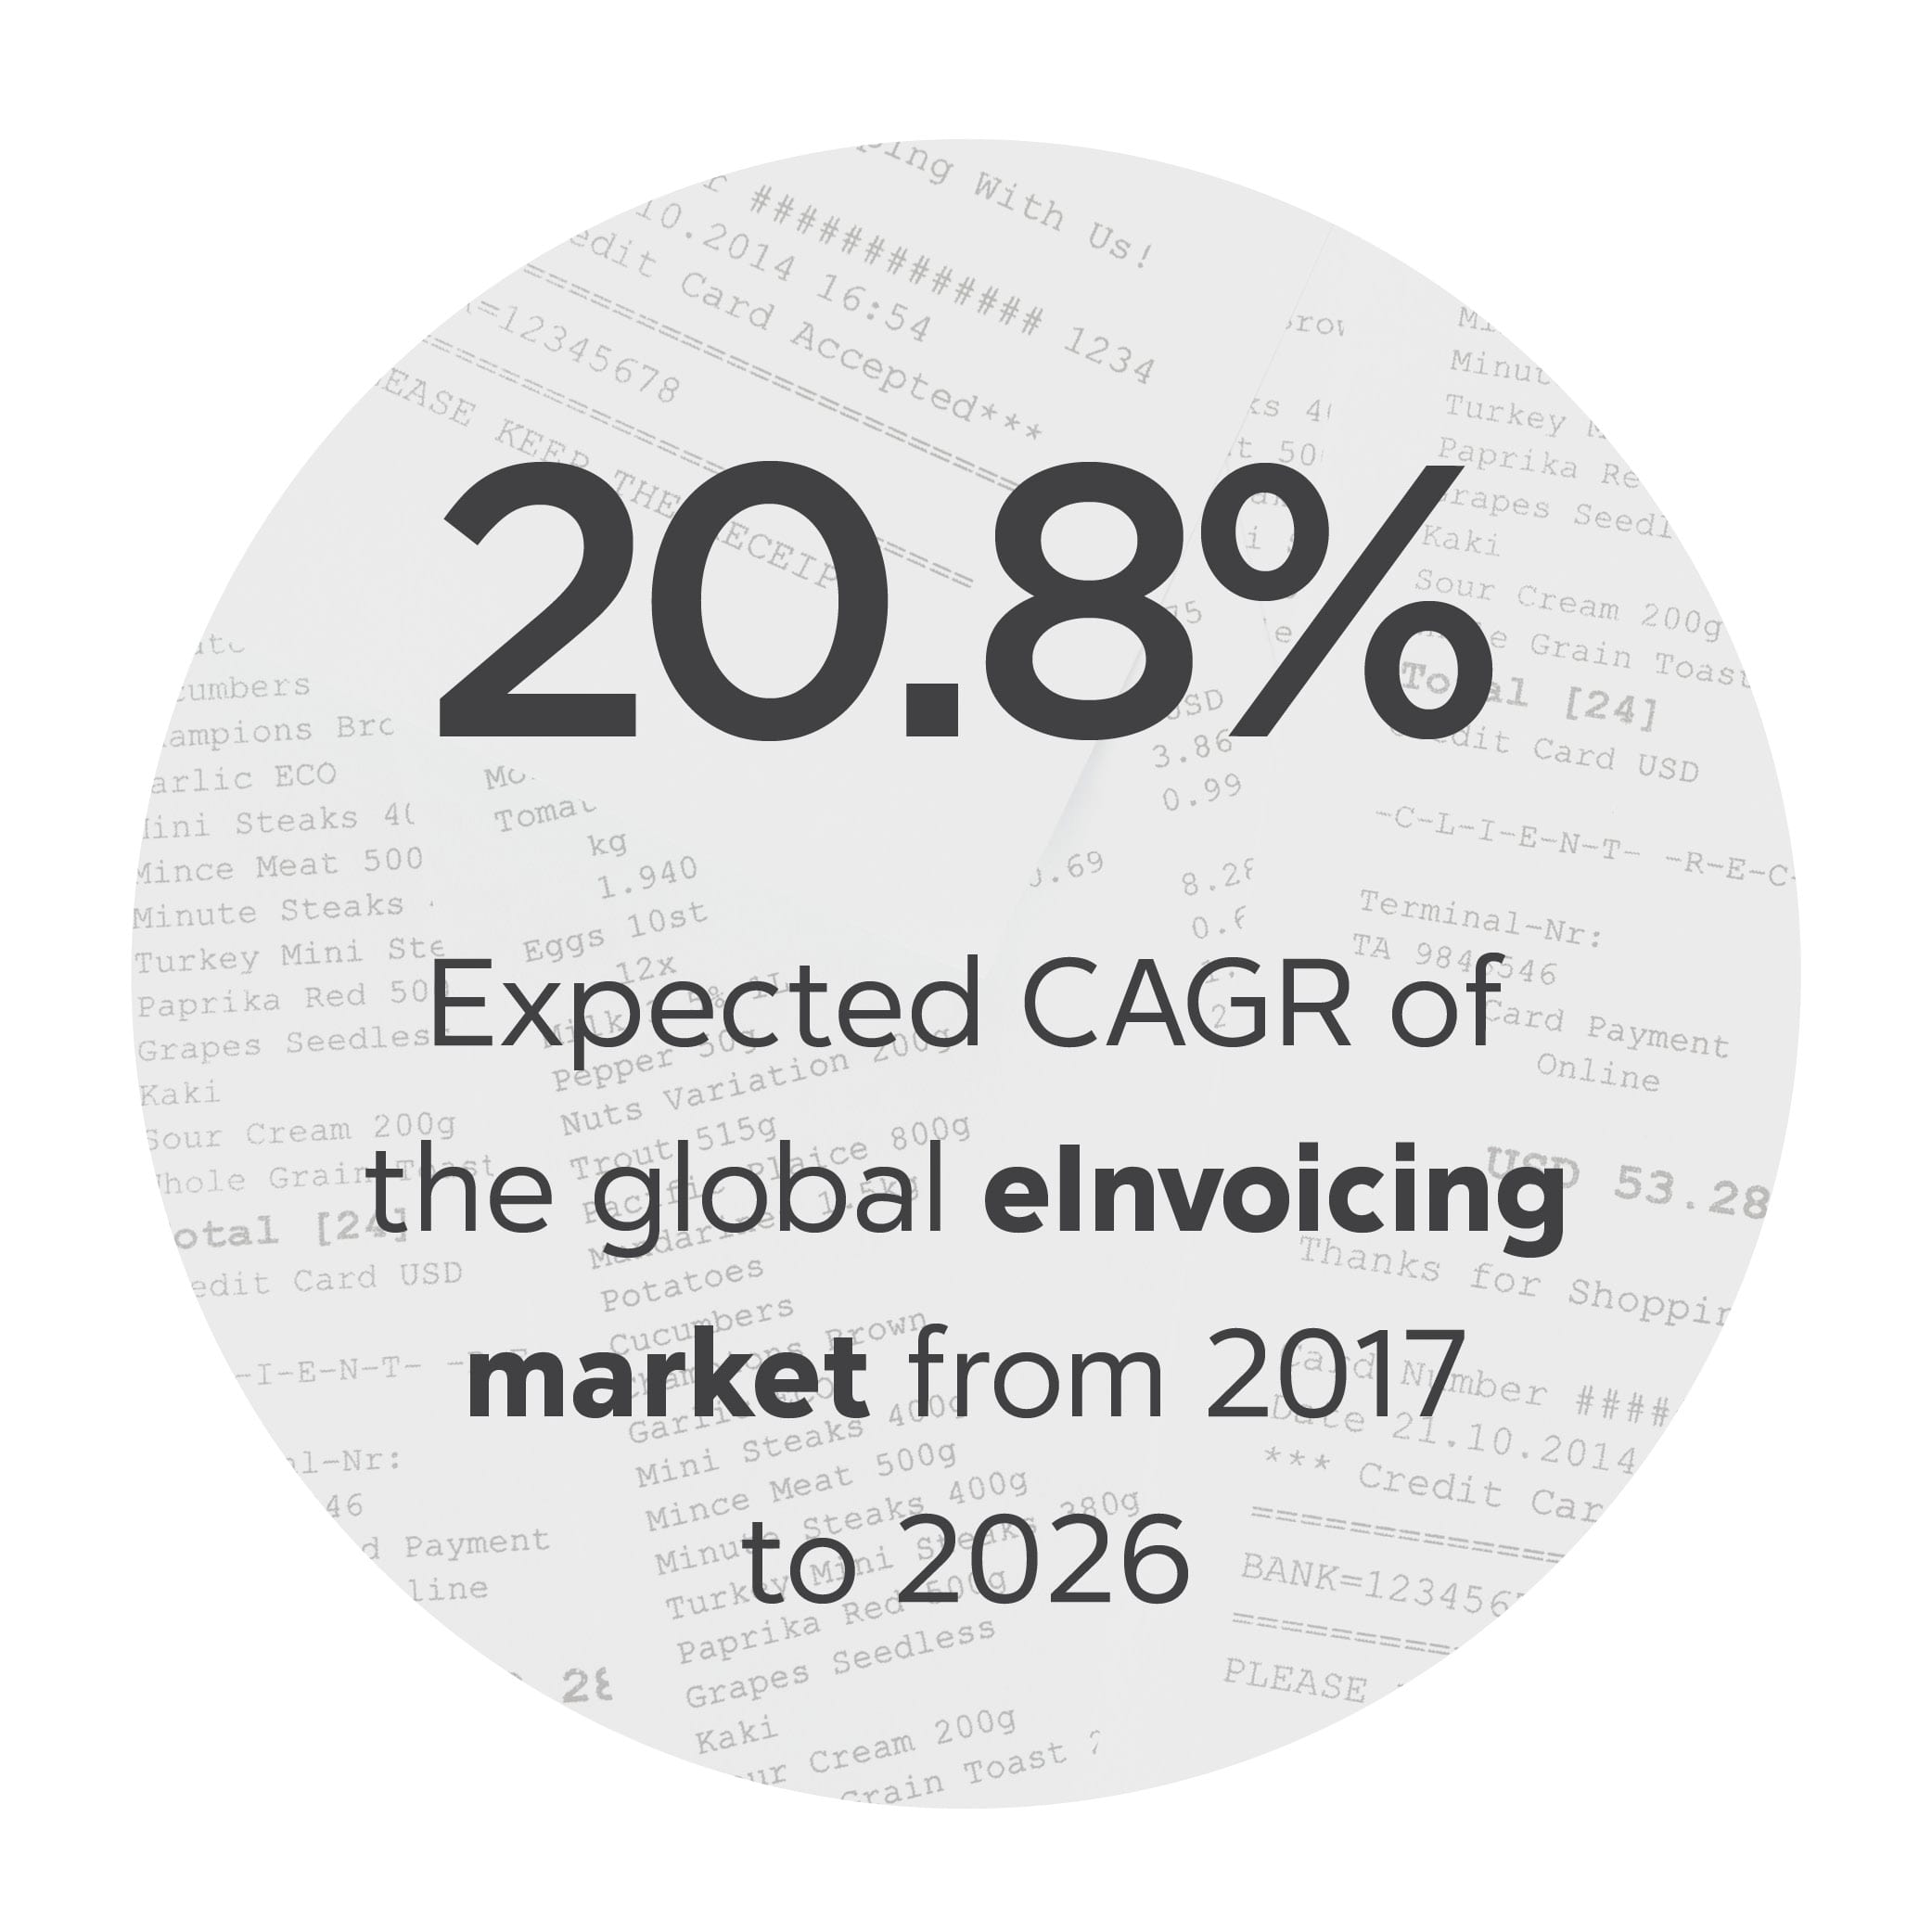 20.8%: Expected CAGR of the global eInvoicing market from 2017 to 2026